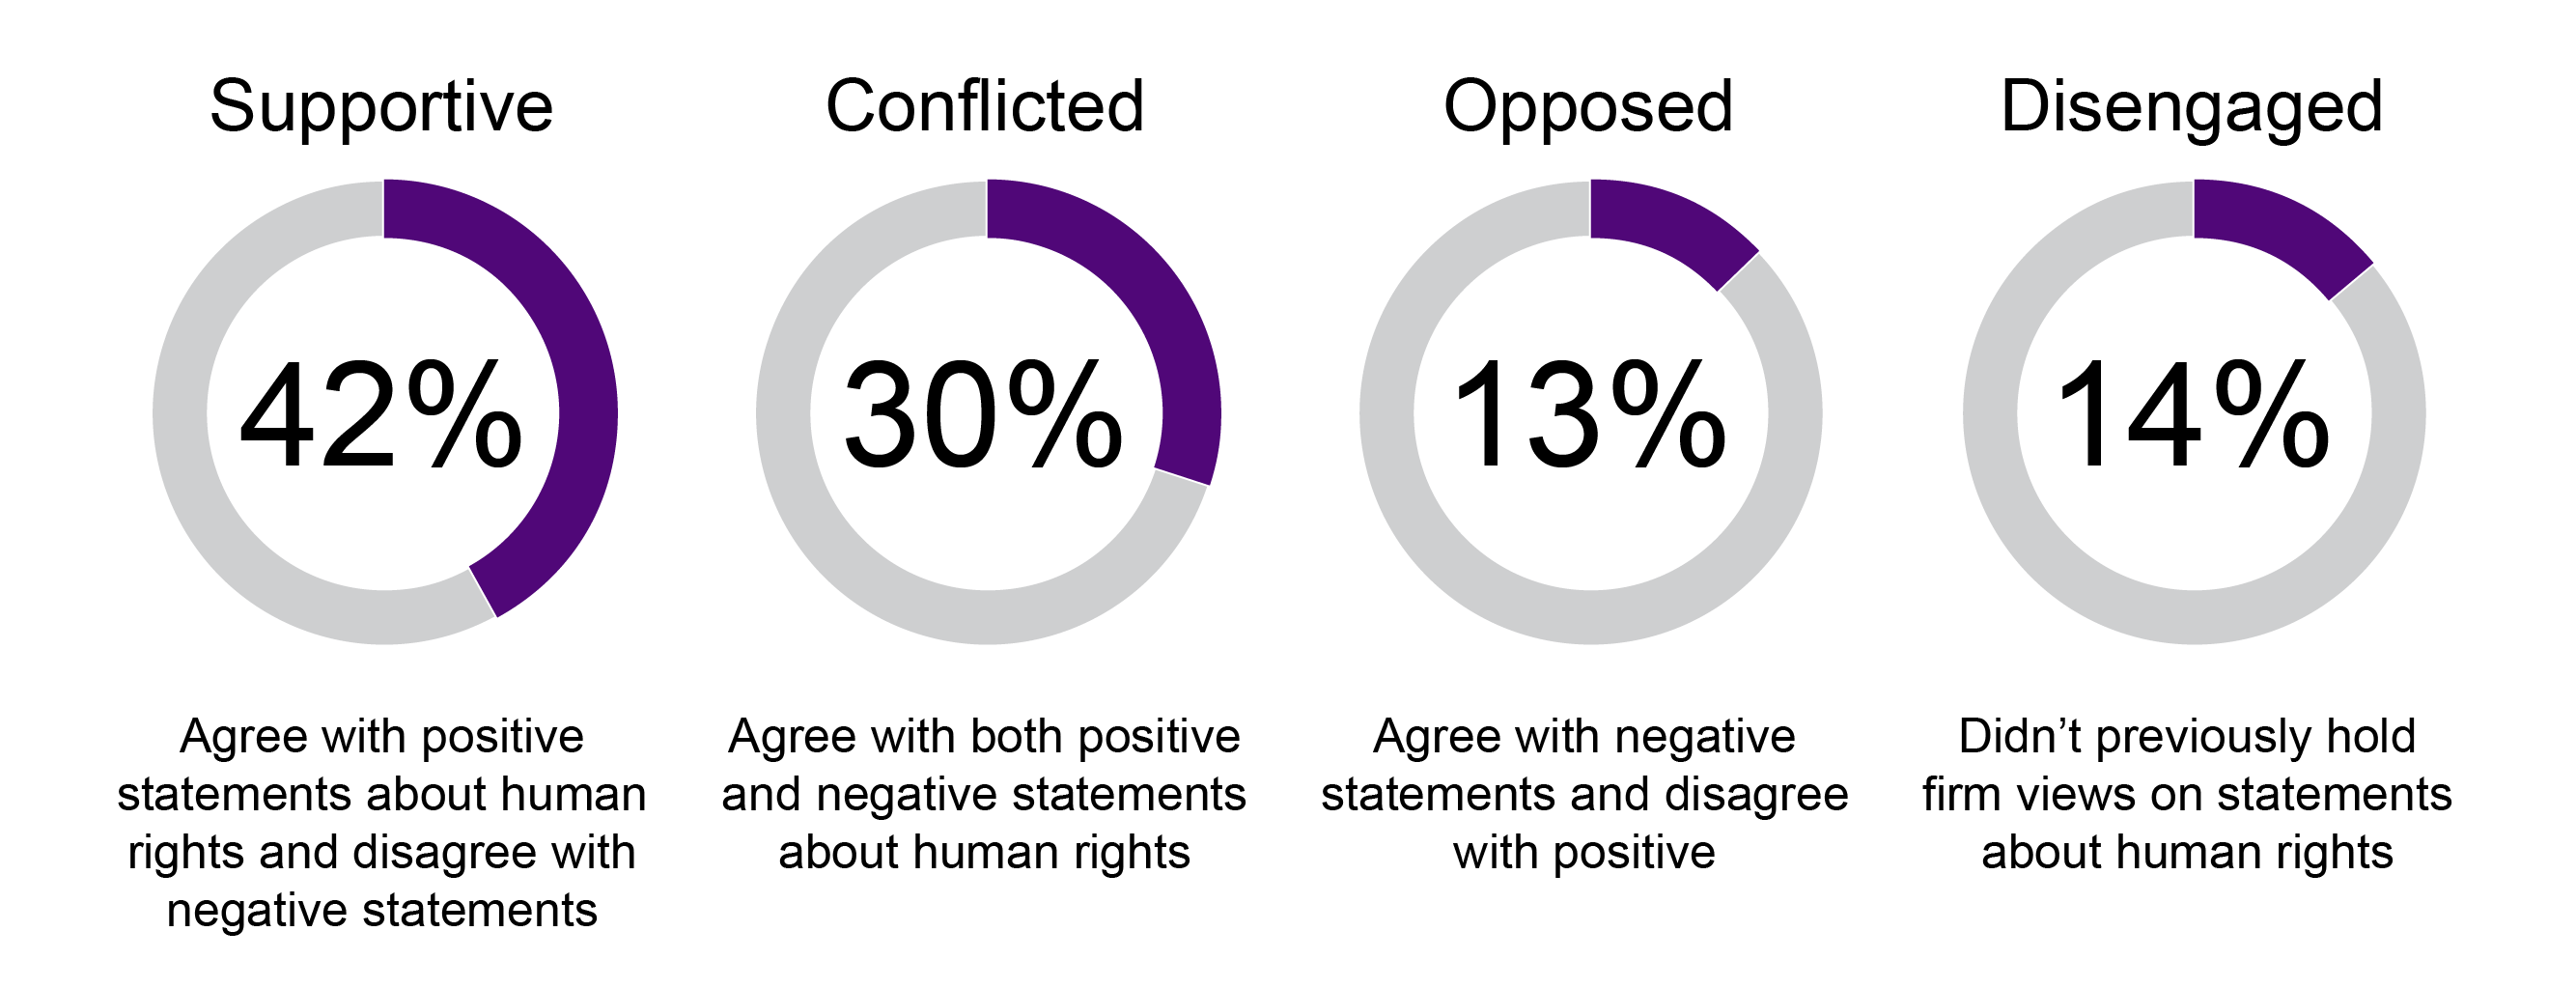 42% agree with positive statements about human rights and disagree with negative statements. 30% agree with both positive and negative statements about human rights. 13% agree with negative statements and disagree with positive. 14% didn't previously hold firm views on statements about human rights. 